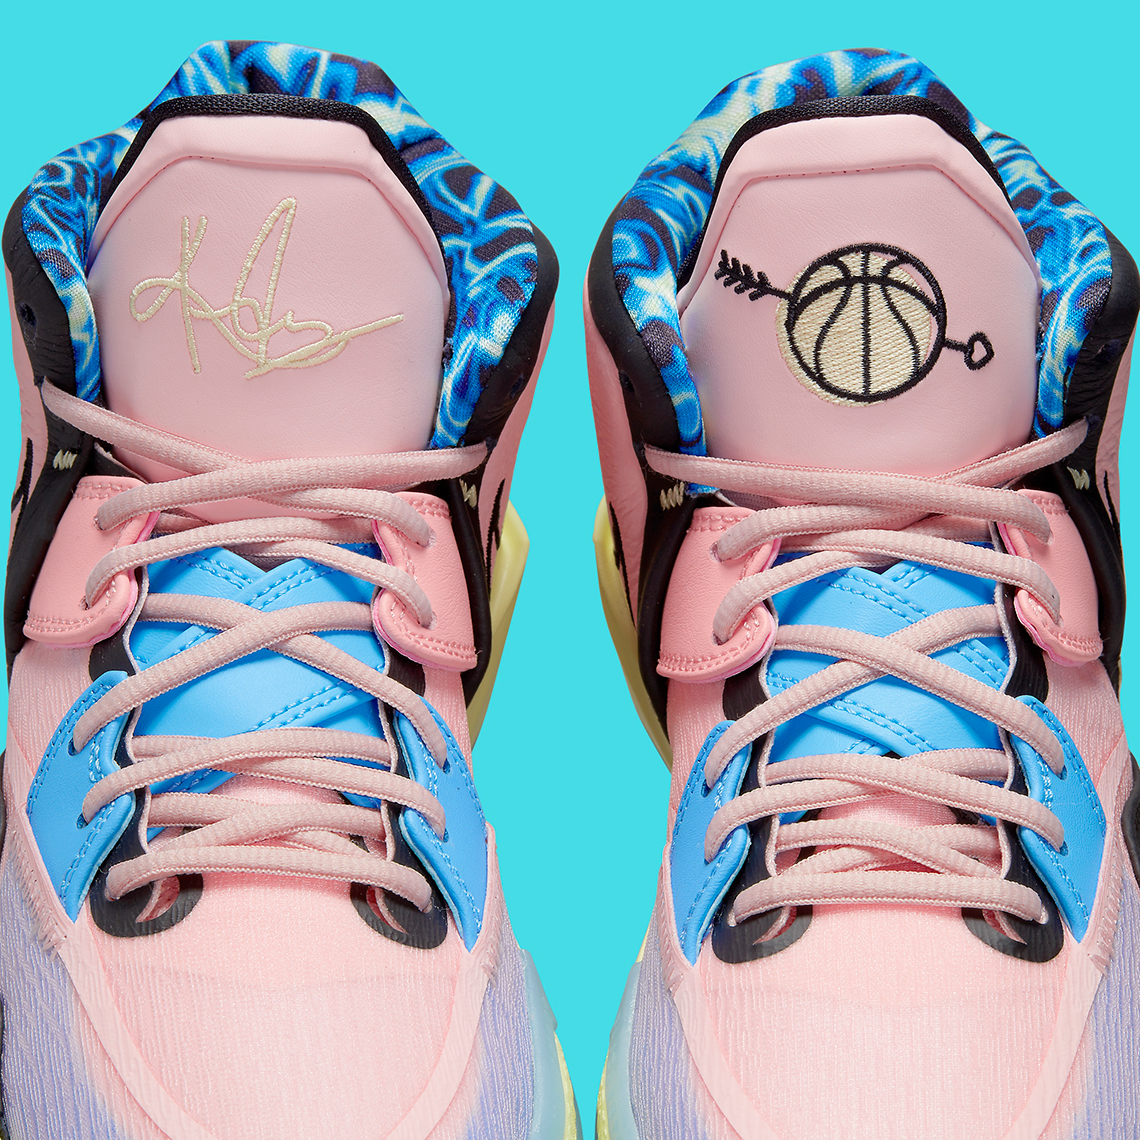 Nike Kyrie gray 8 Infinity Valentines Day Dh5385 900 Release Date 9